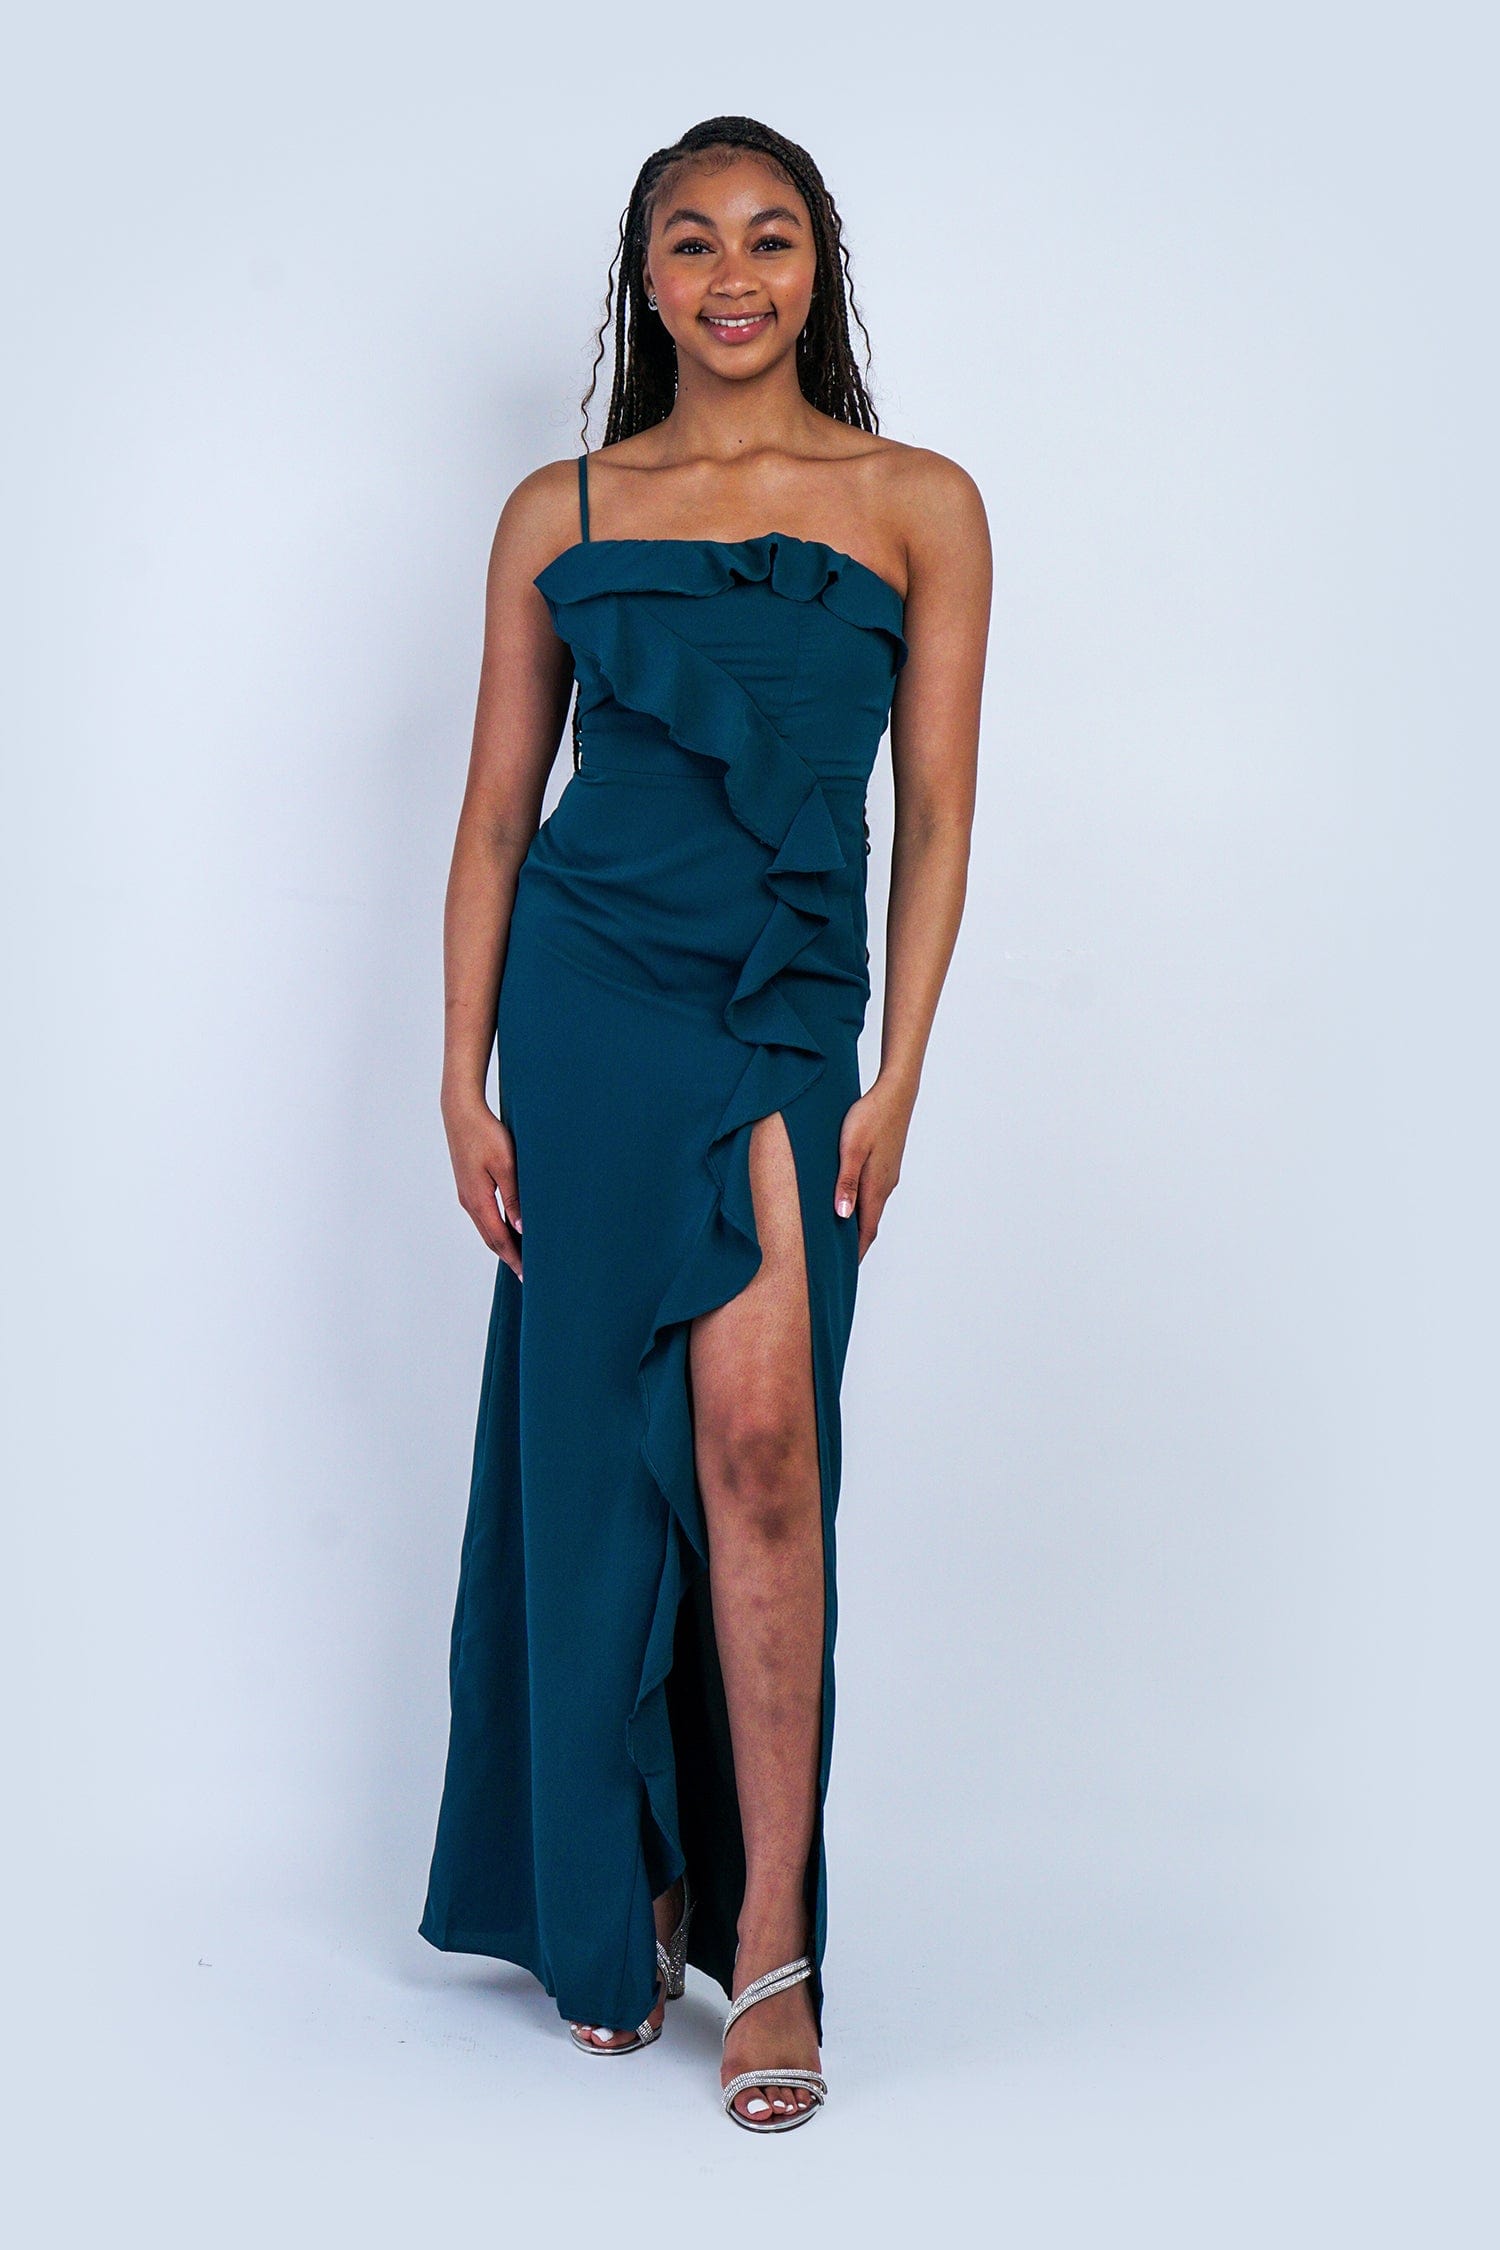 DCD GOWNS Deep Teal One Shoulder Delicate Ruffle Gown